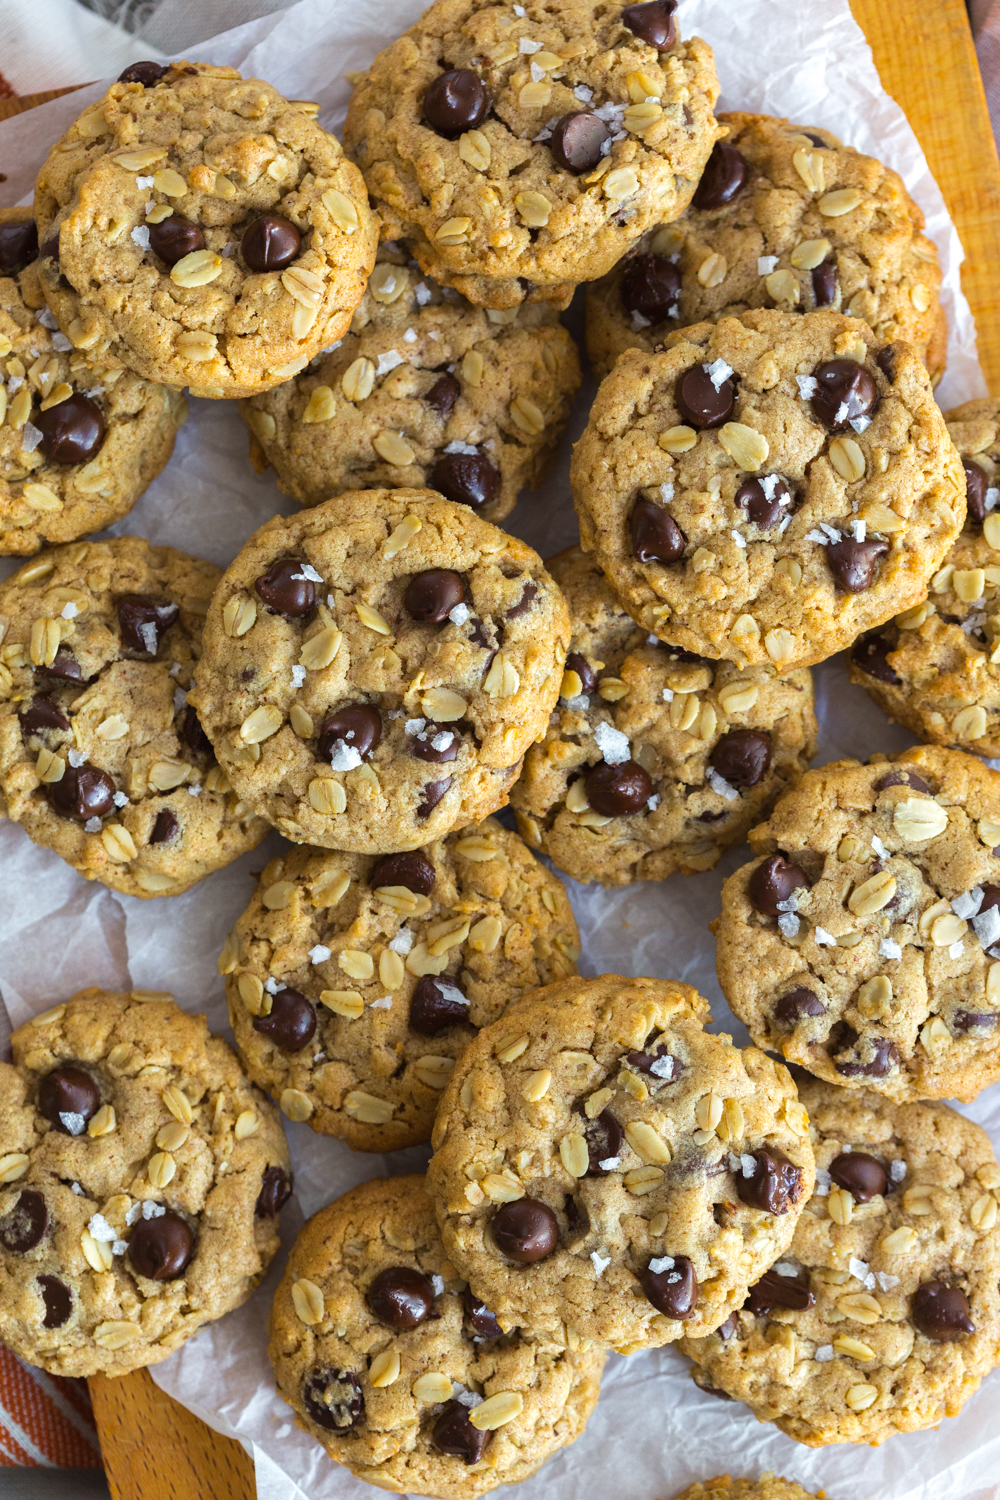 Pile of Almond Butter Oatmeal Chocolate Chip Cookies